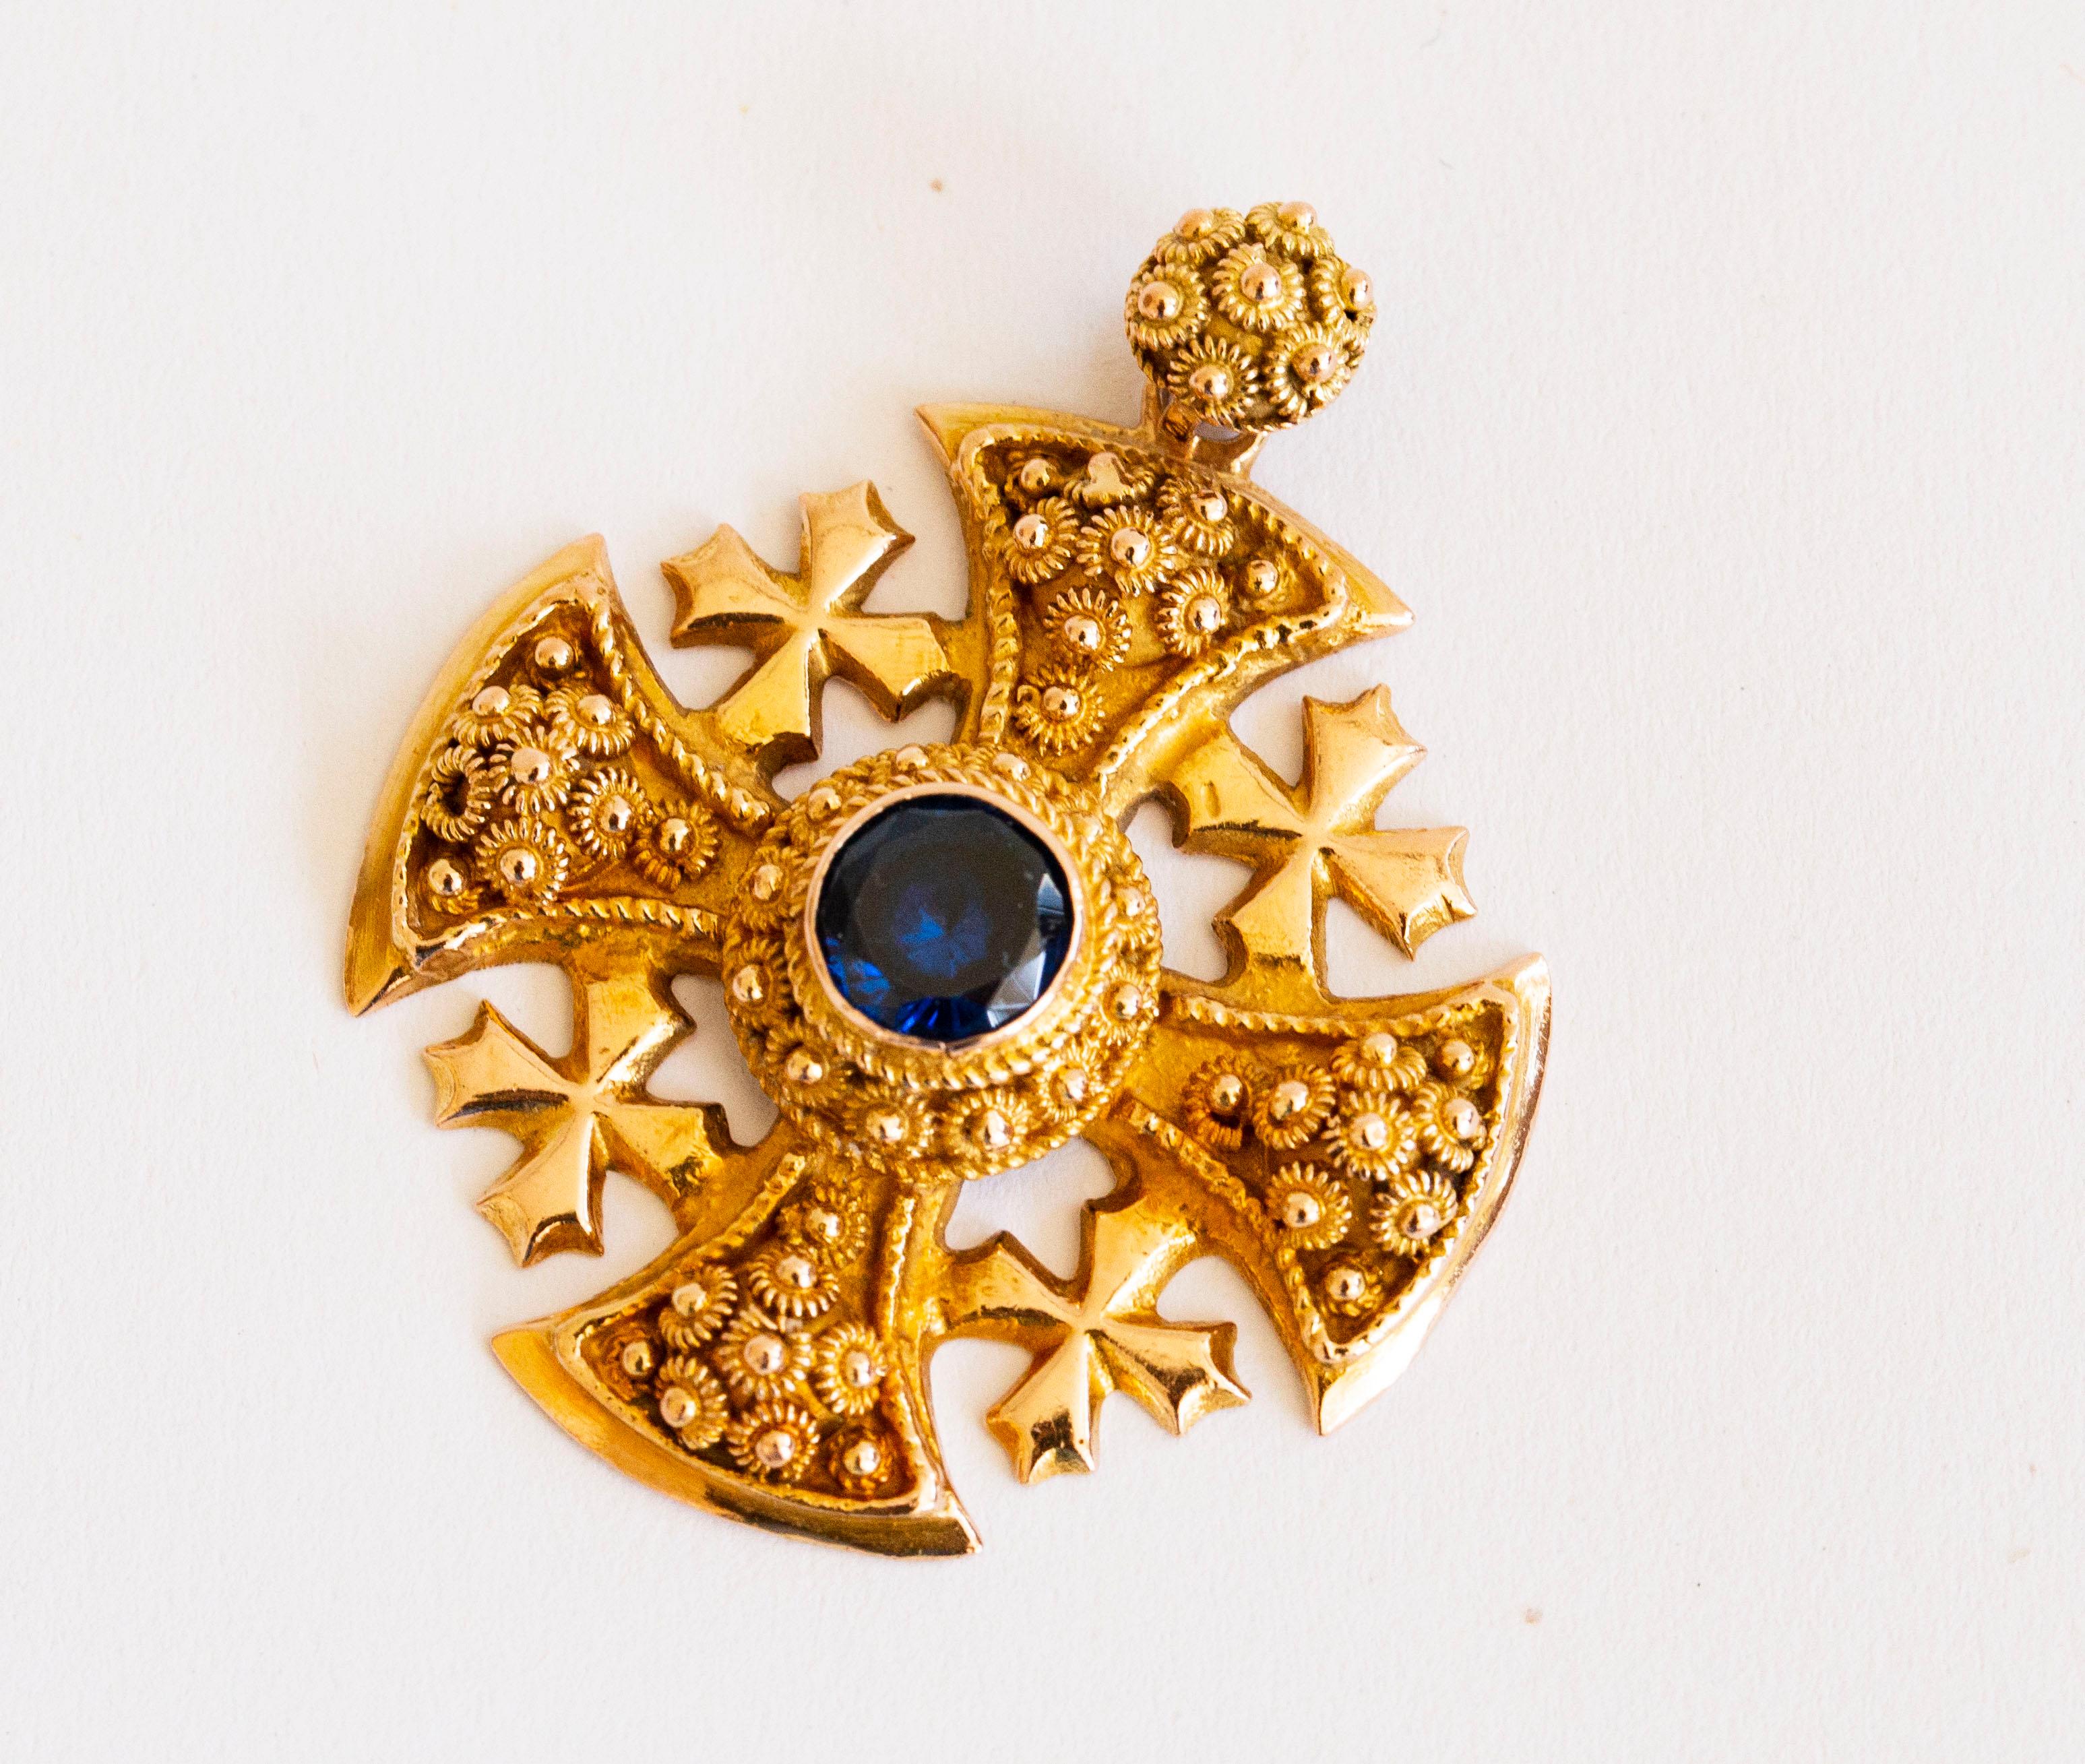 A vintage Jerusalem Crusaders Cross Pendant made of 14 karat yellow gold with a blue stone. The pendant features the Etruscan Revival style with the characteristic rich decoration of cannetille, rosettes and wirework. The pendant is marked with 14K